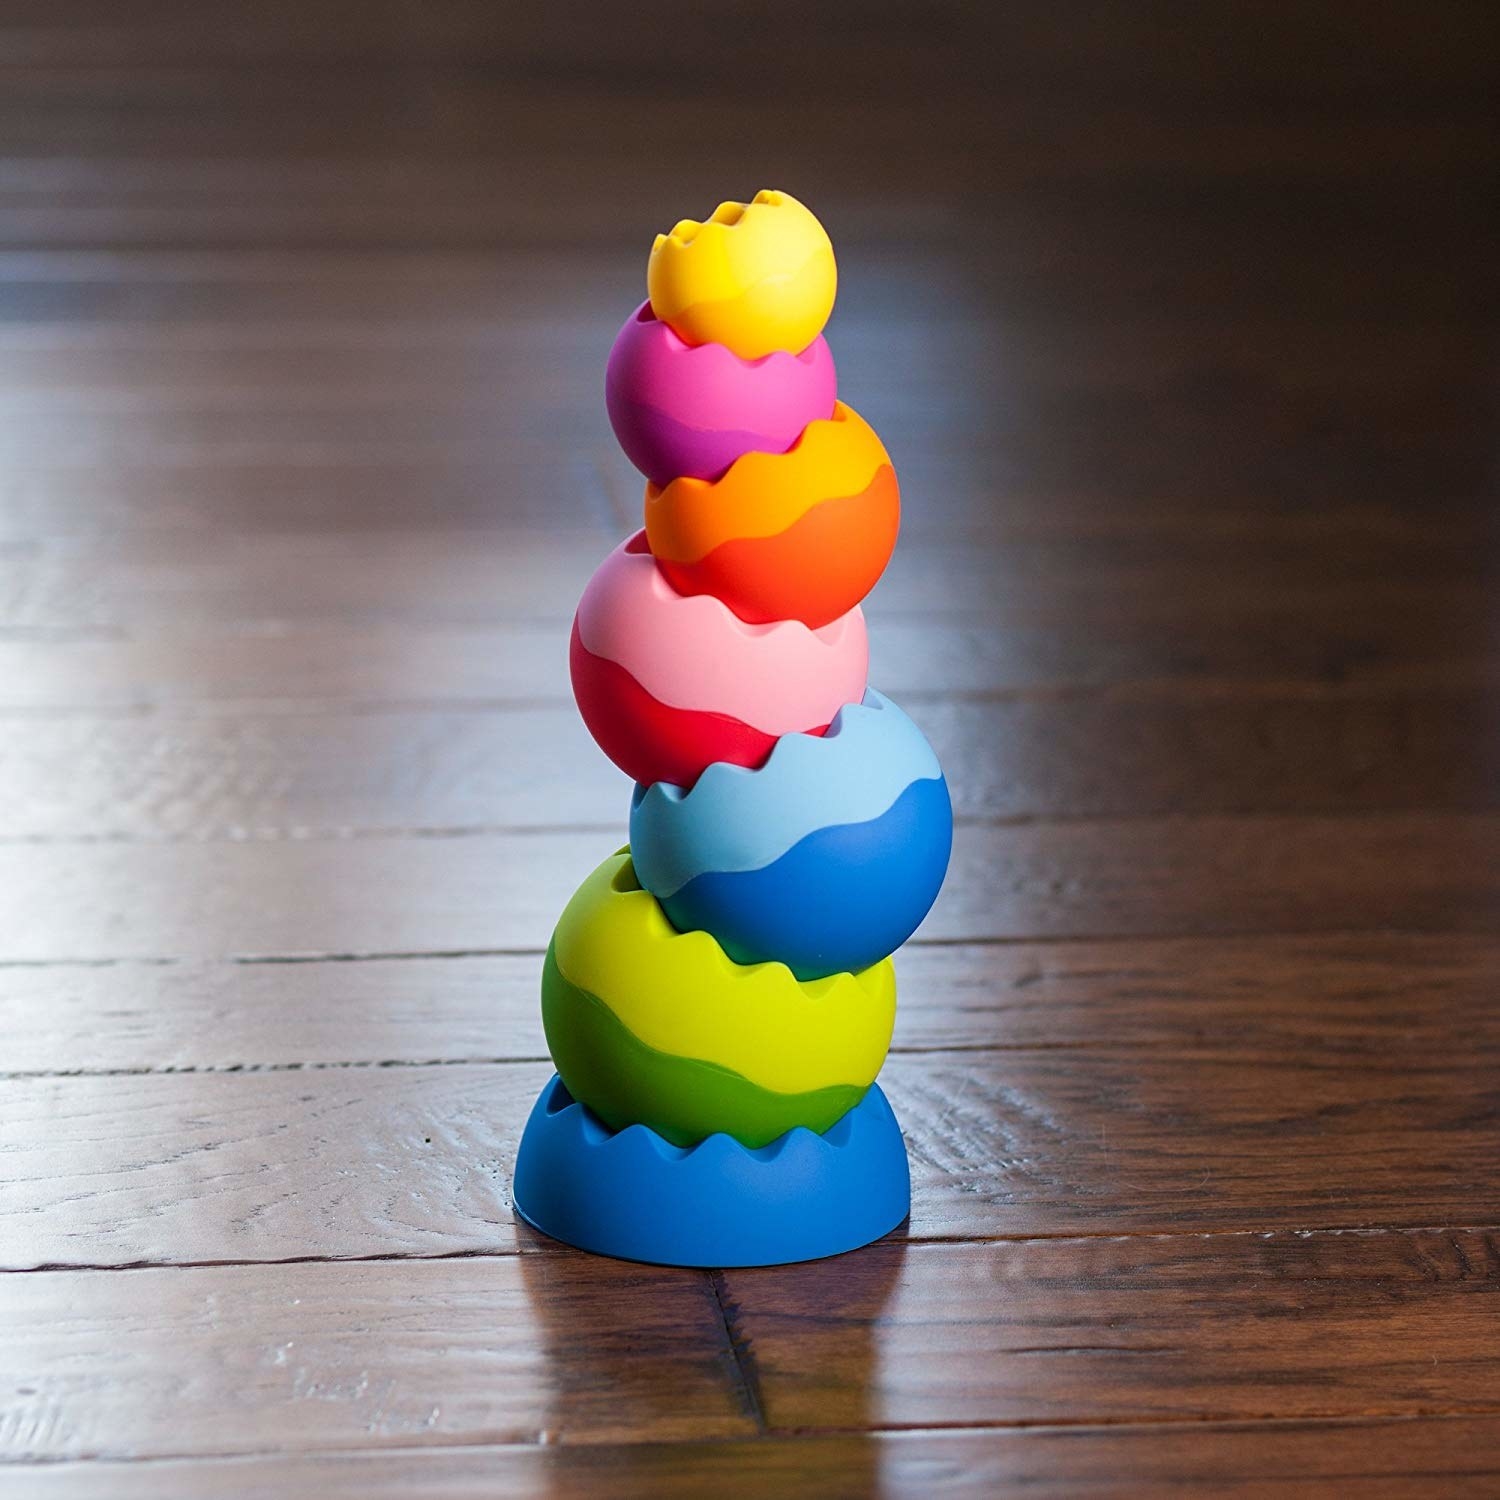 Colorful set of stacking sphere toys